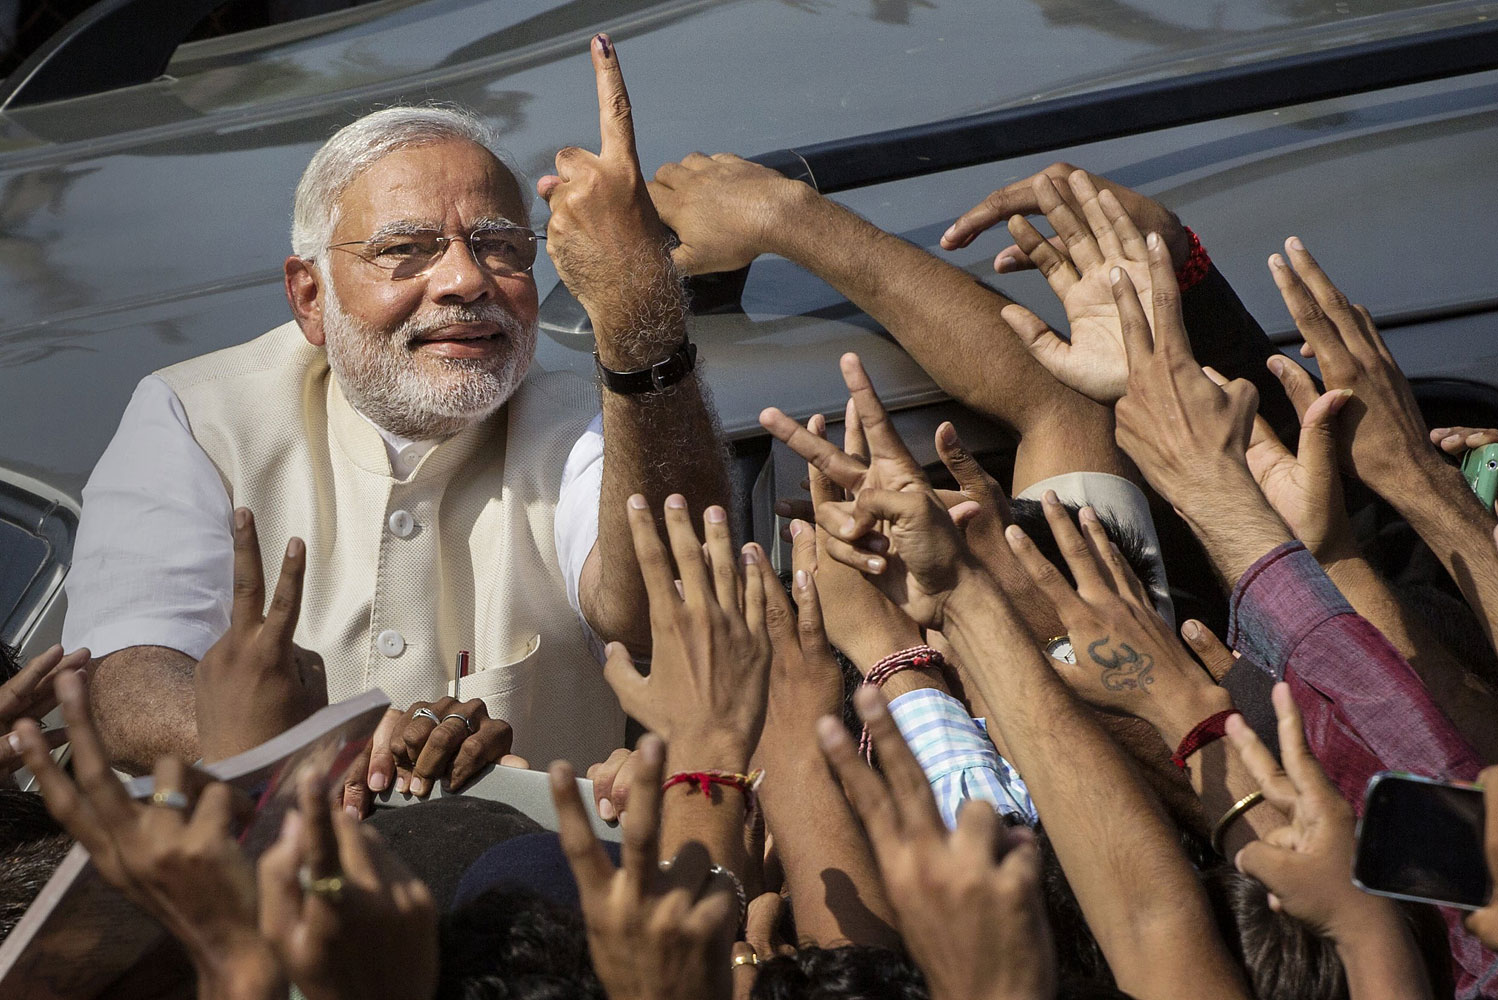 BJP leader Narendra Modi shows his inked finger to supporters as he leaves a polling station after voting on April 30, 2014 in Ahmedabad, India. 